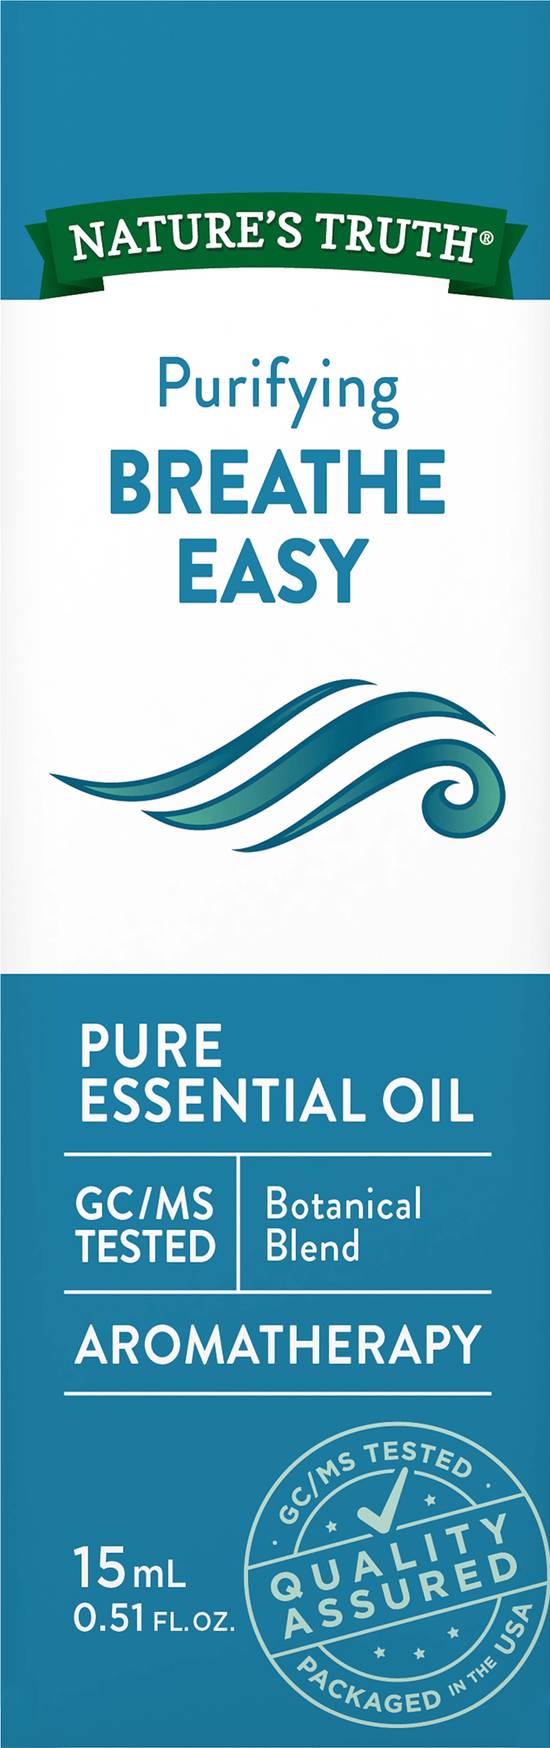 Nature's Truth Purifying Breathe Easy Pure Essential Oil